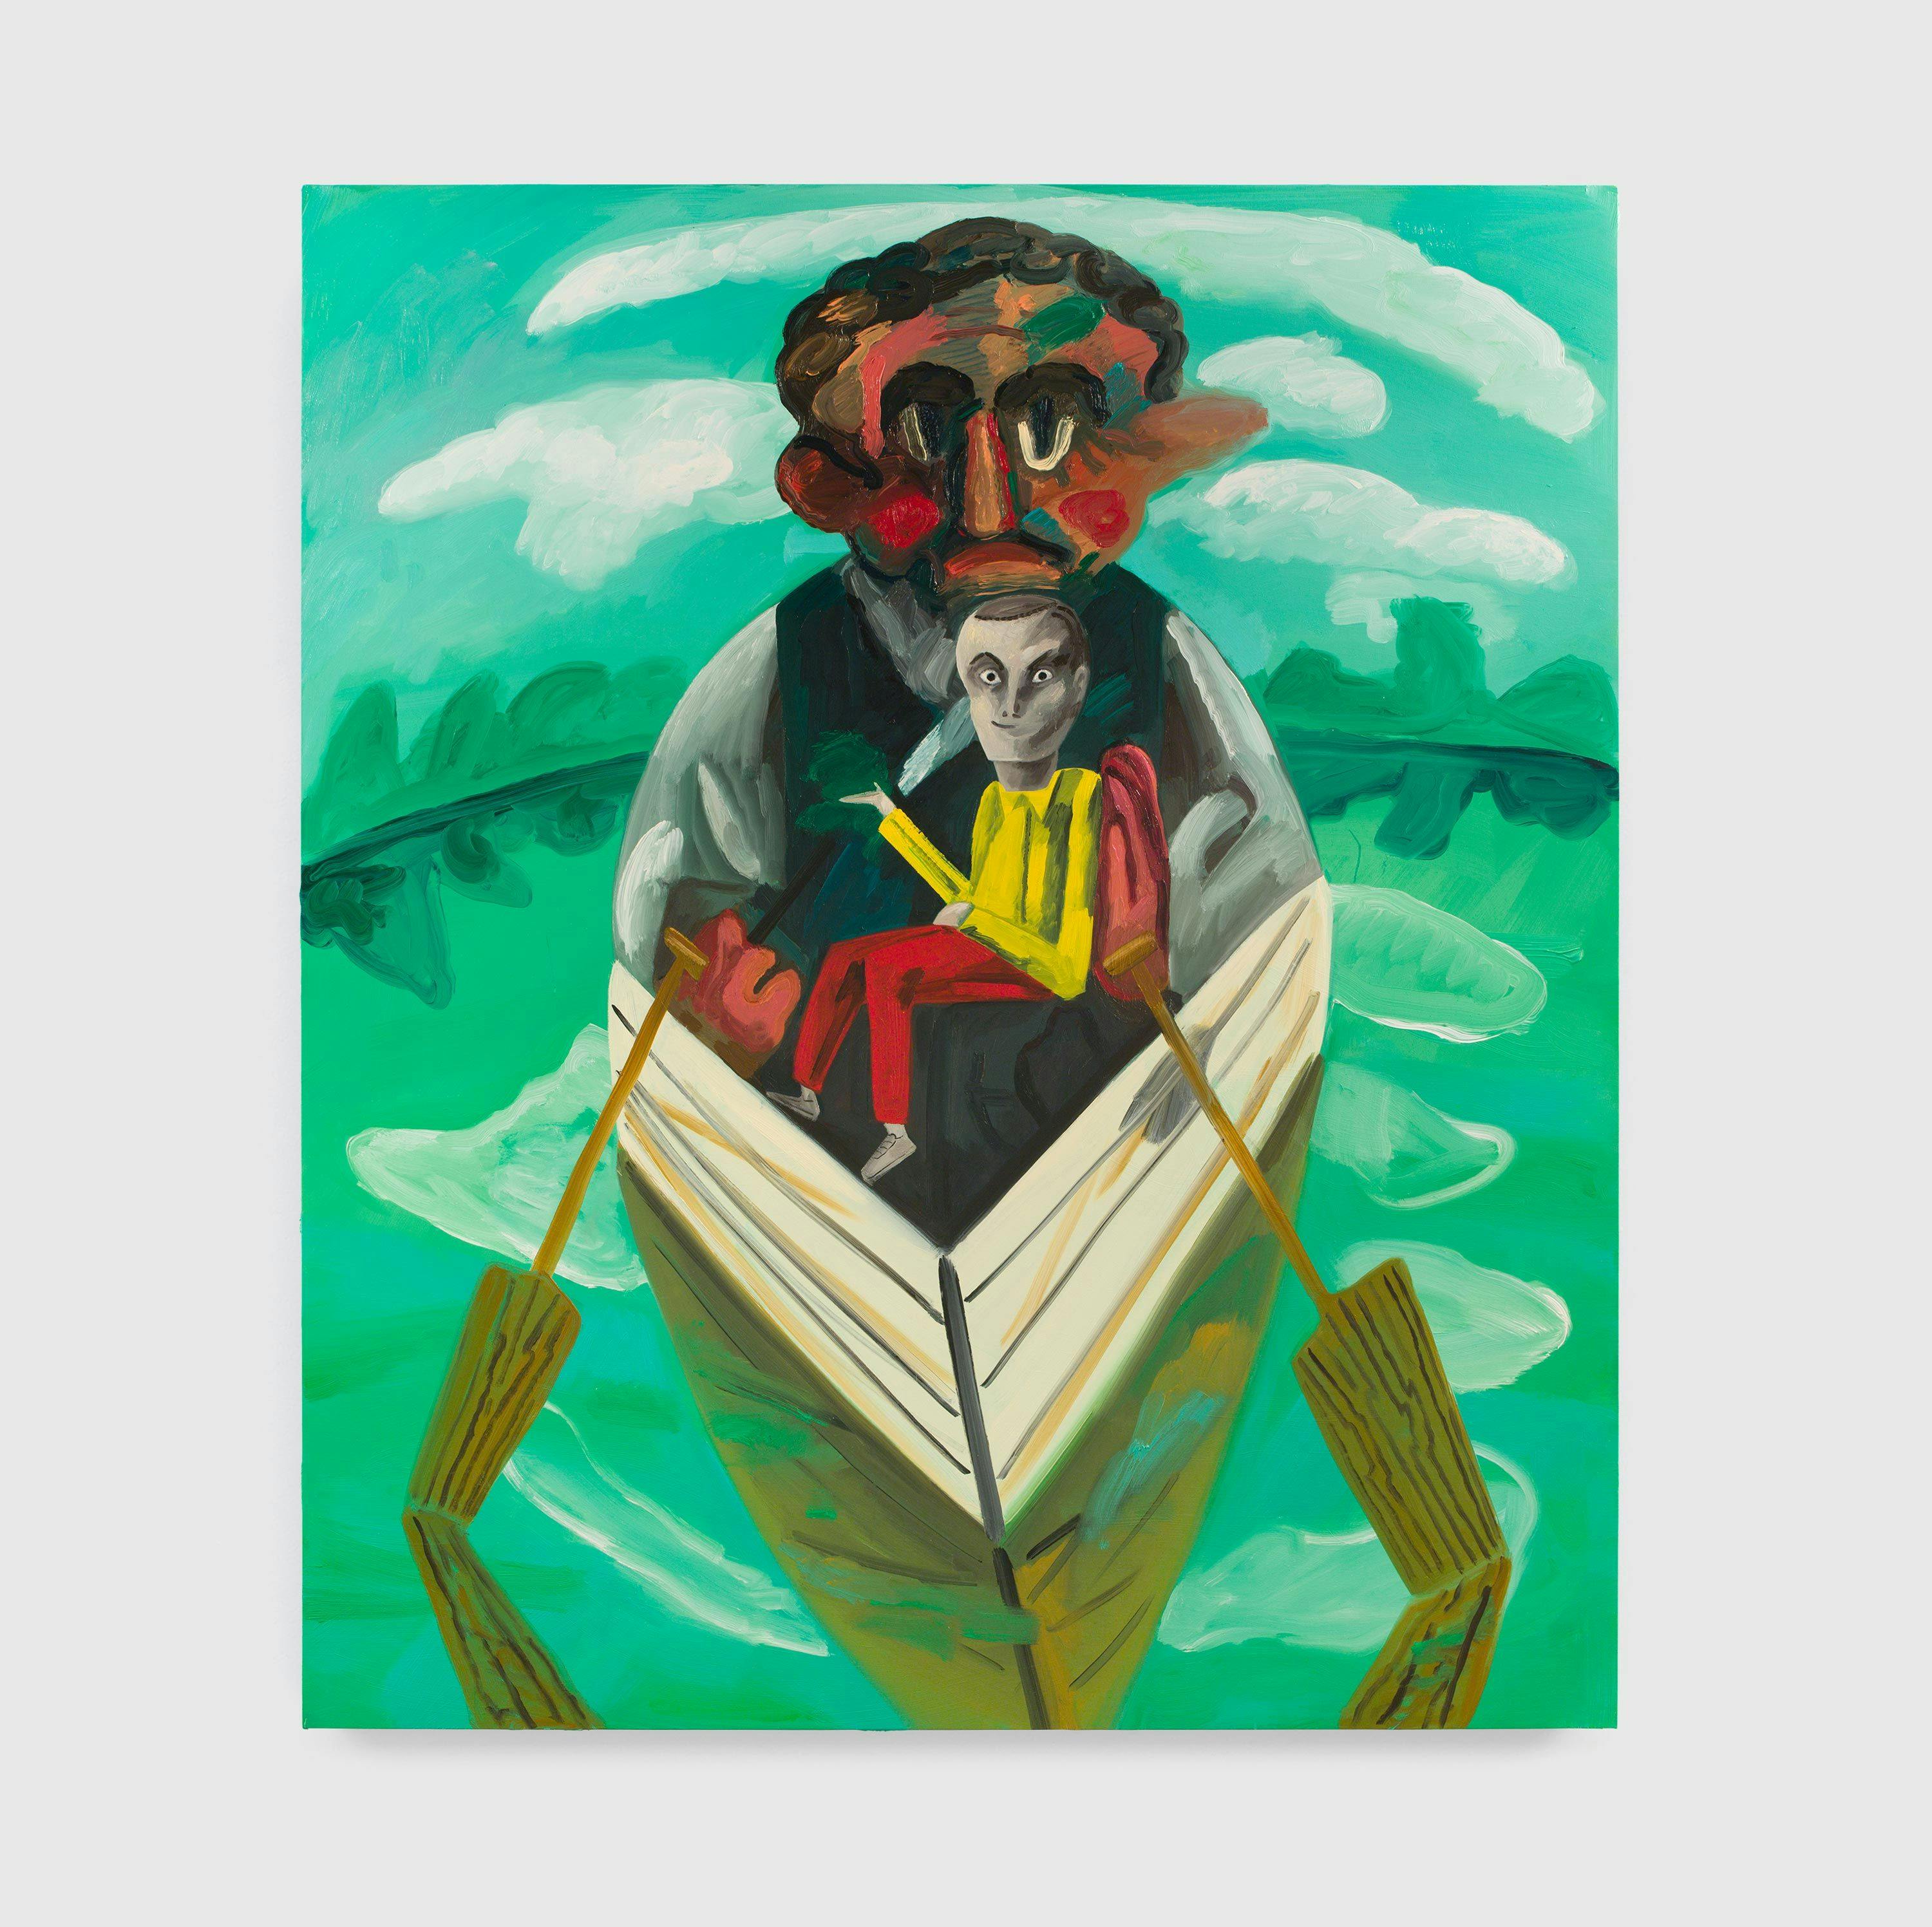 A painting by Dana Schutz, titled Boatman, dated 2018.